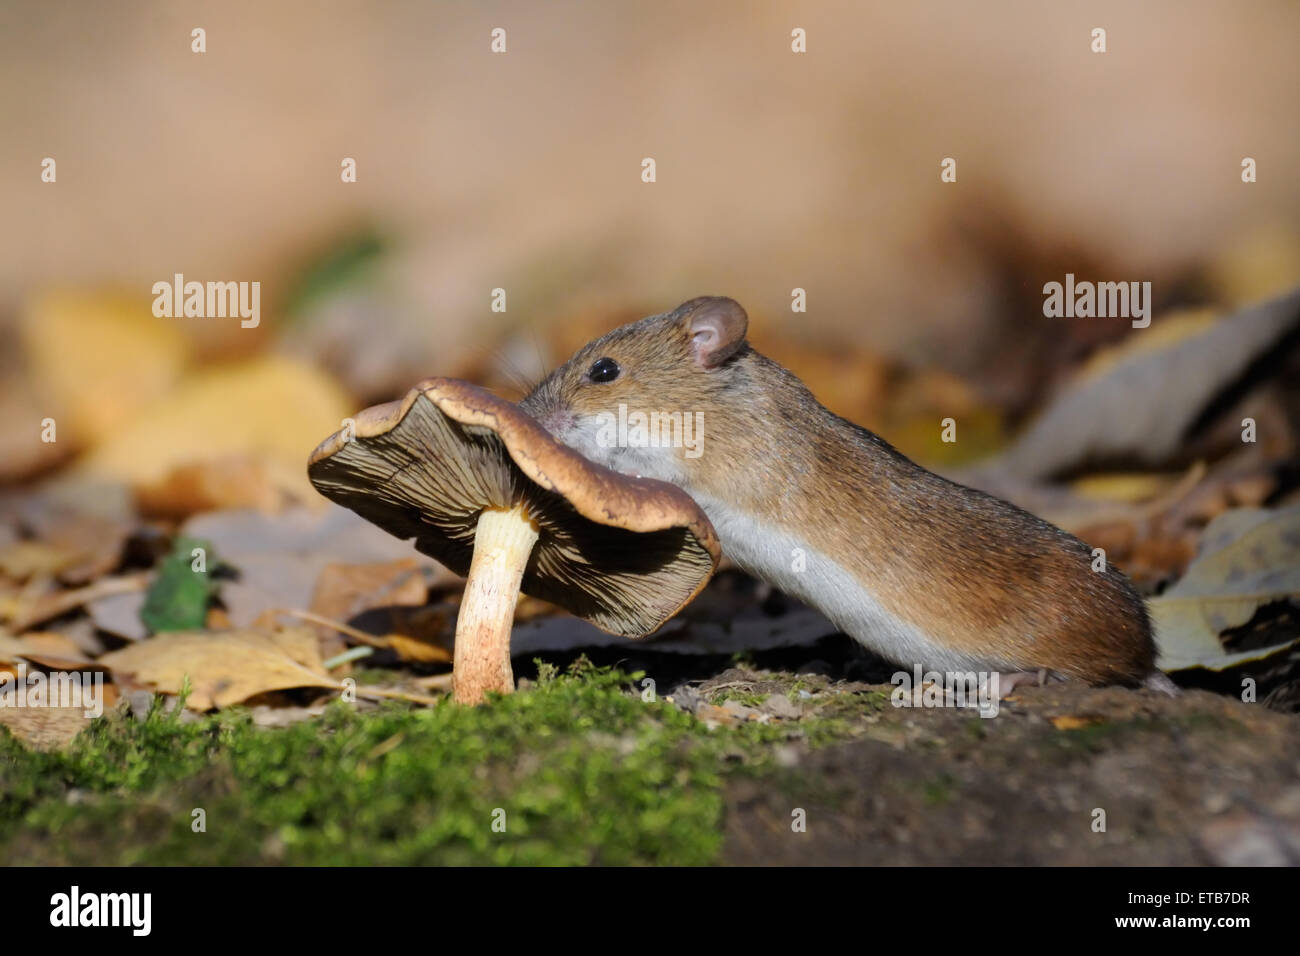 Striped Field Mouse at mushroom Stock Photo